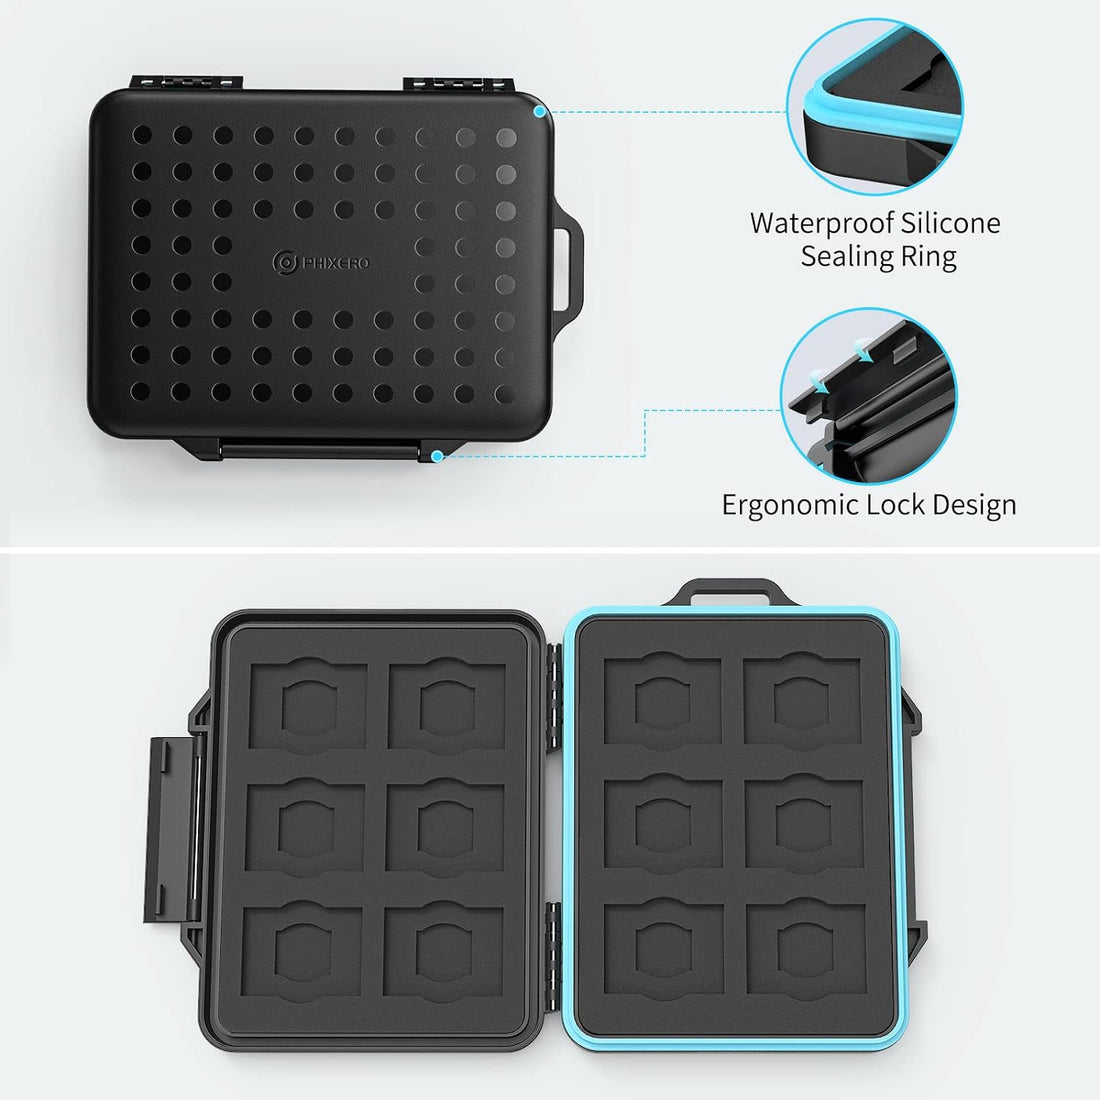 PHIXERO 24 Slots Portable SD Card Holder Case, Memory Card Case, Memory Card Holder Protector Case, SD Card Storage Box for 12 SD SDHC SDXC Cards & 12 TF Micro SD Cards, Water-Resistant Anti-Shock